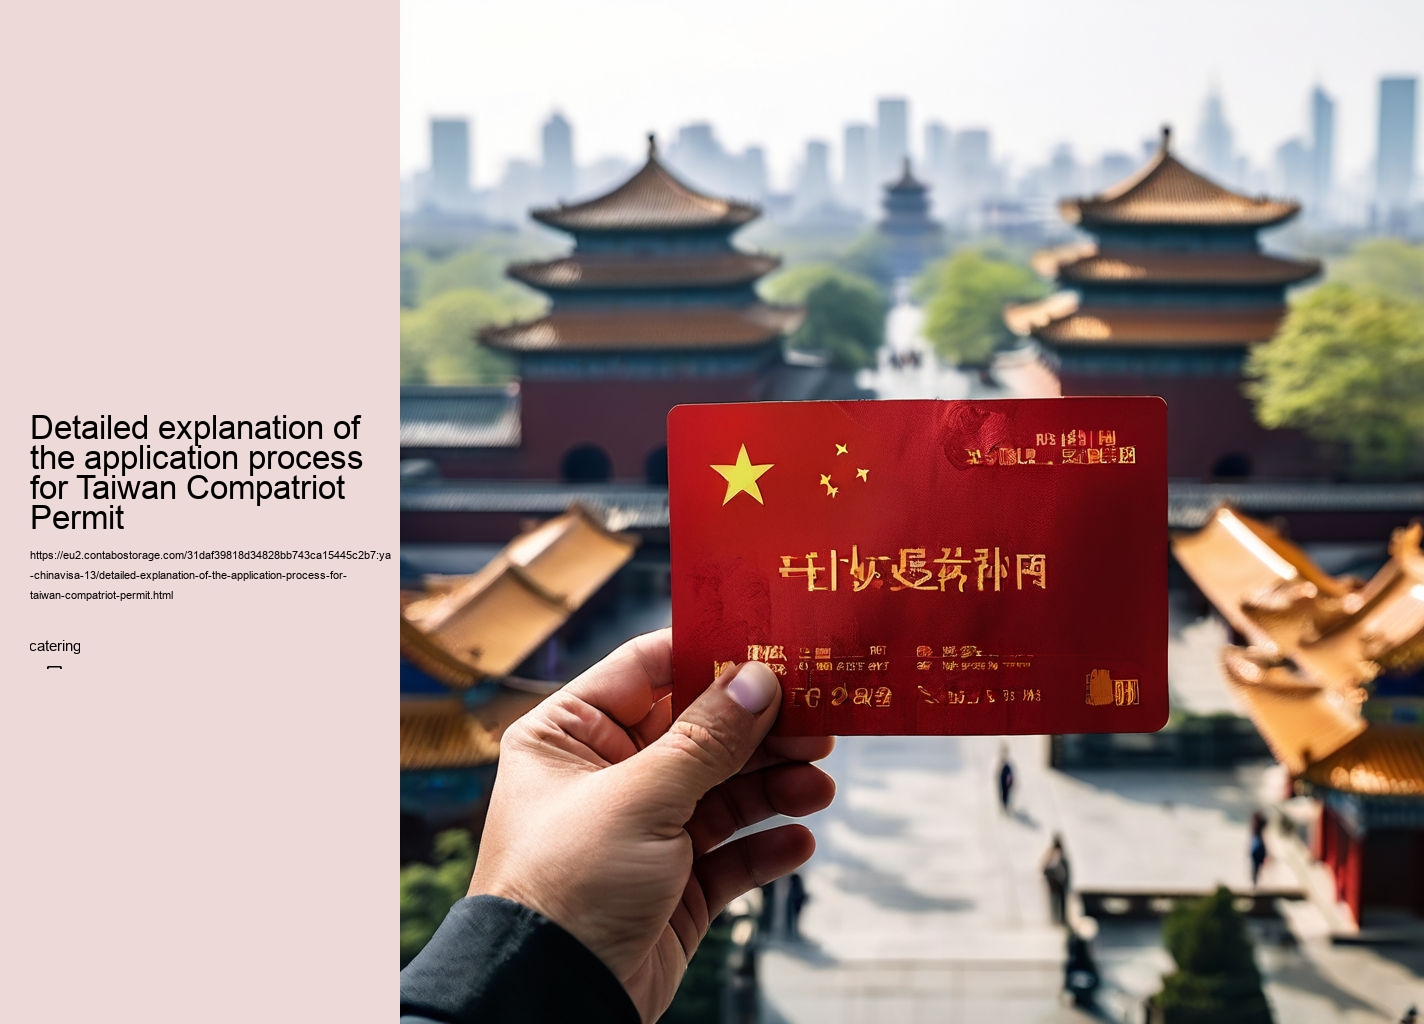 Detailed explanation of the application process for Taiwan Compatriot Permit